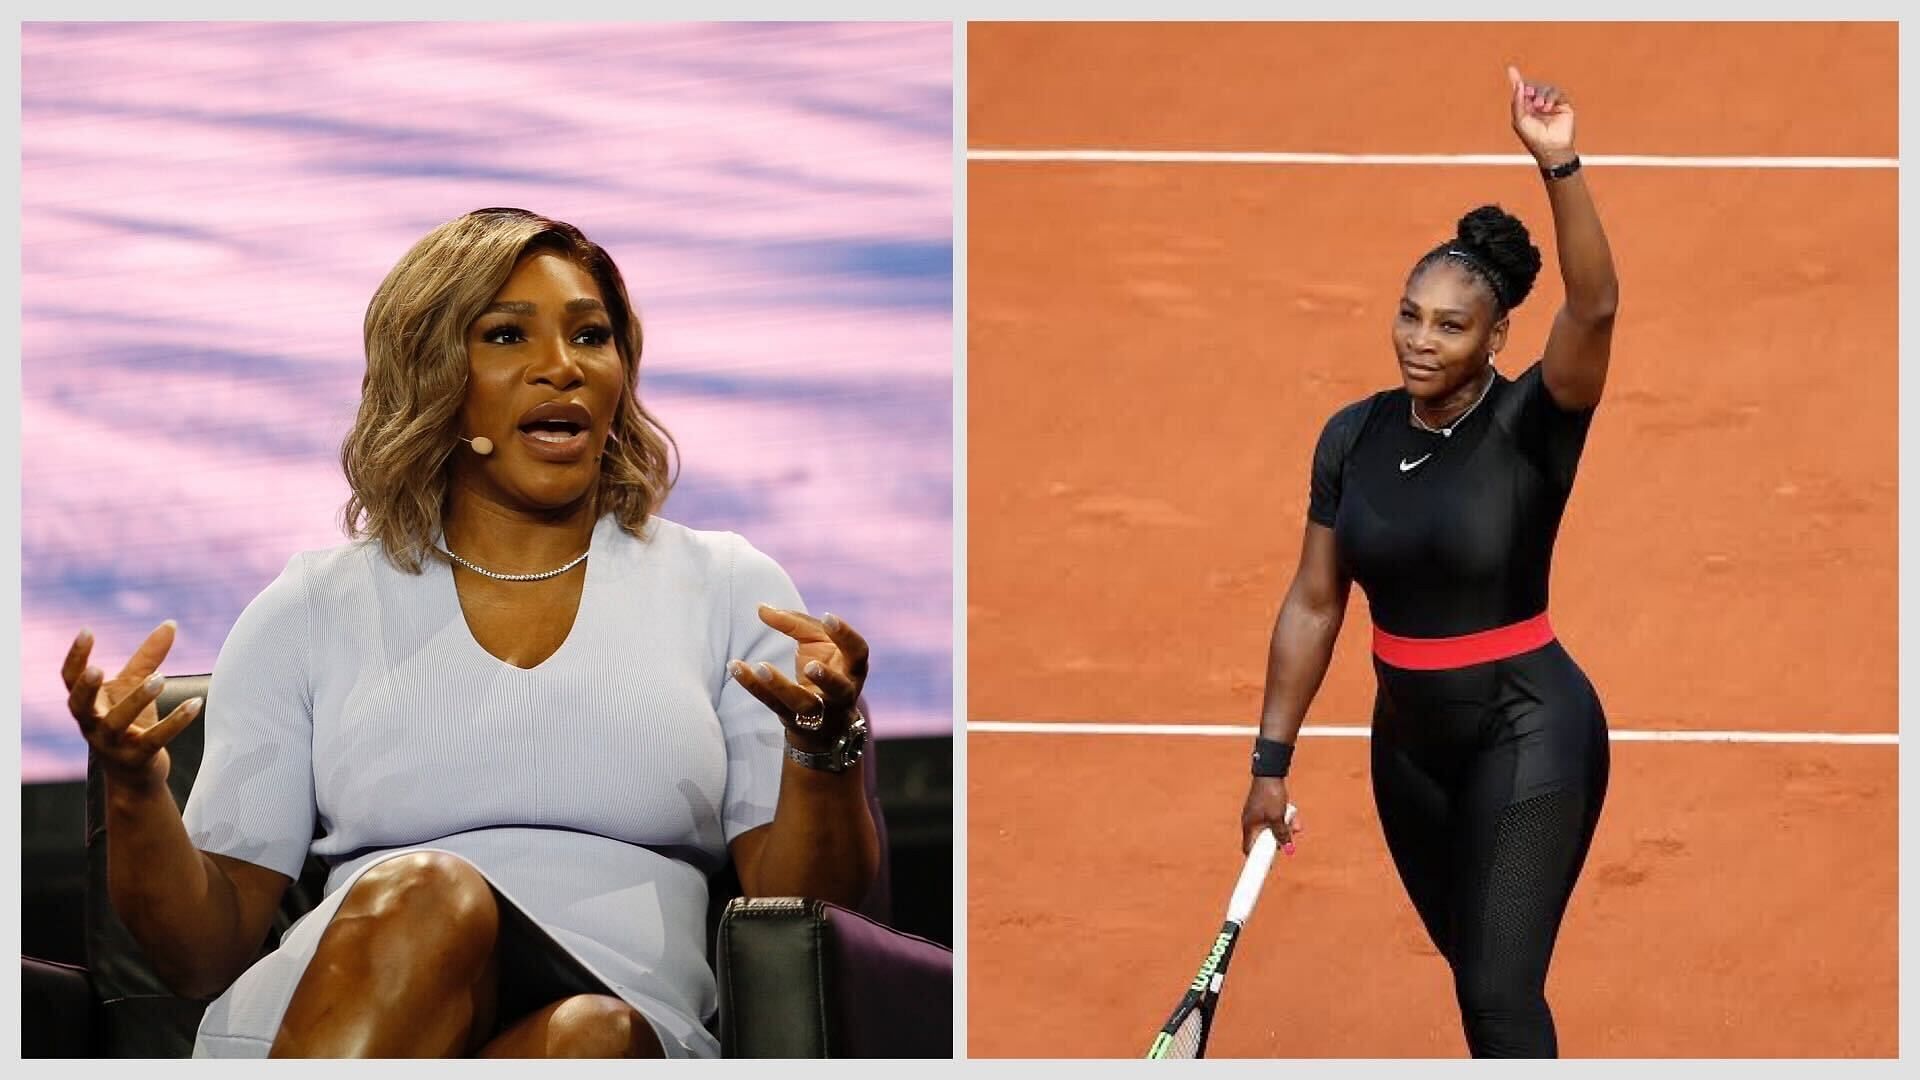 Serena Williams wore a bodysuit at the 2018 French Open that made waves in the tennis world